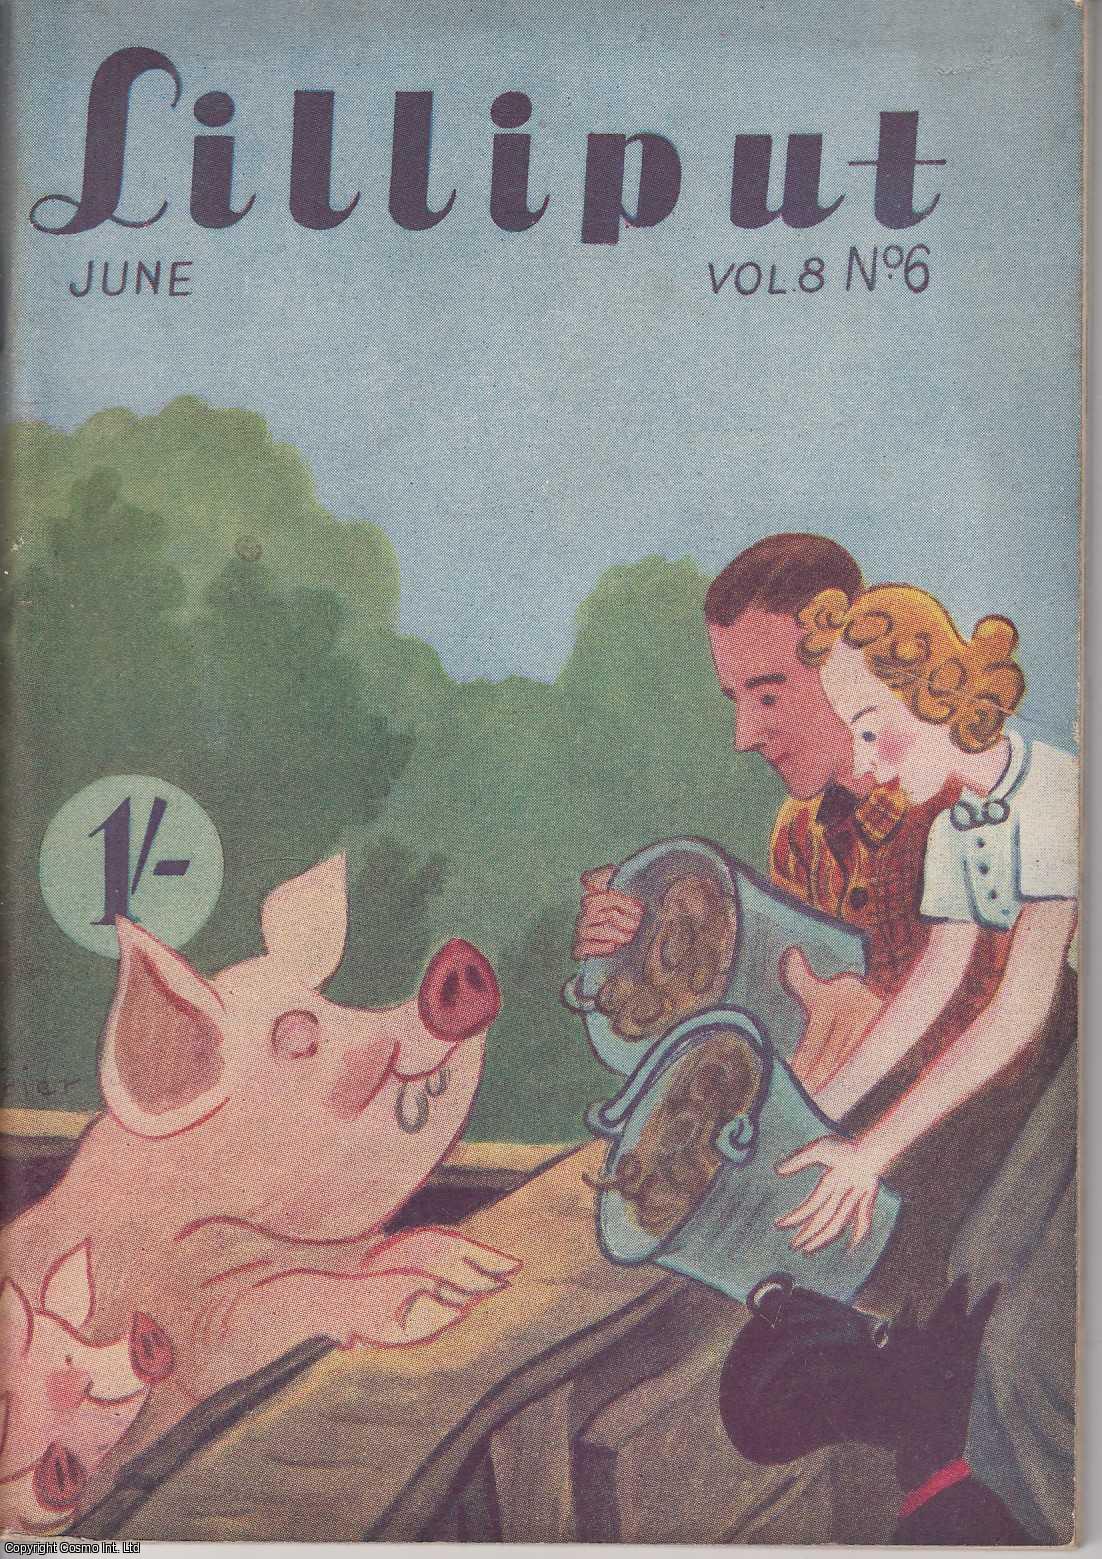 Lilliput - Lilliput Magazine. June 1941. Vol.8 no.6 Issue no.48. Ian Coster on James Agate, Robert Lynd, Allen Johns, and other pieces.